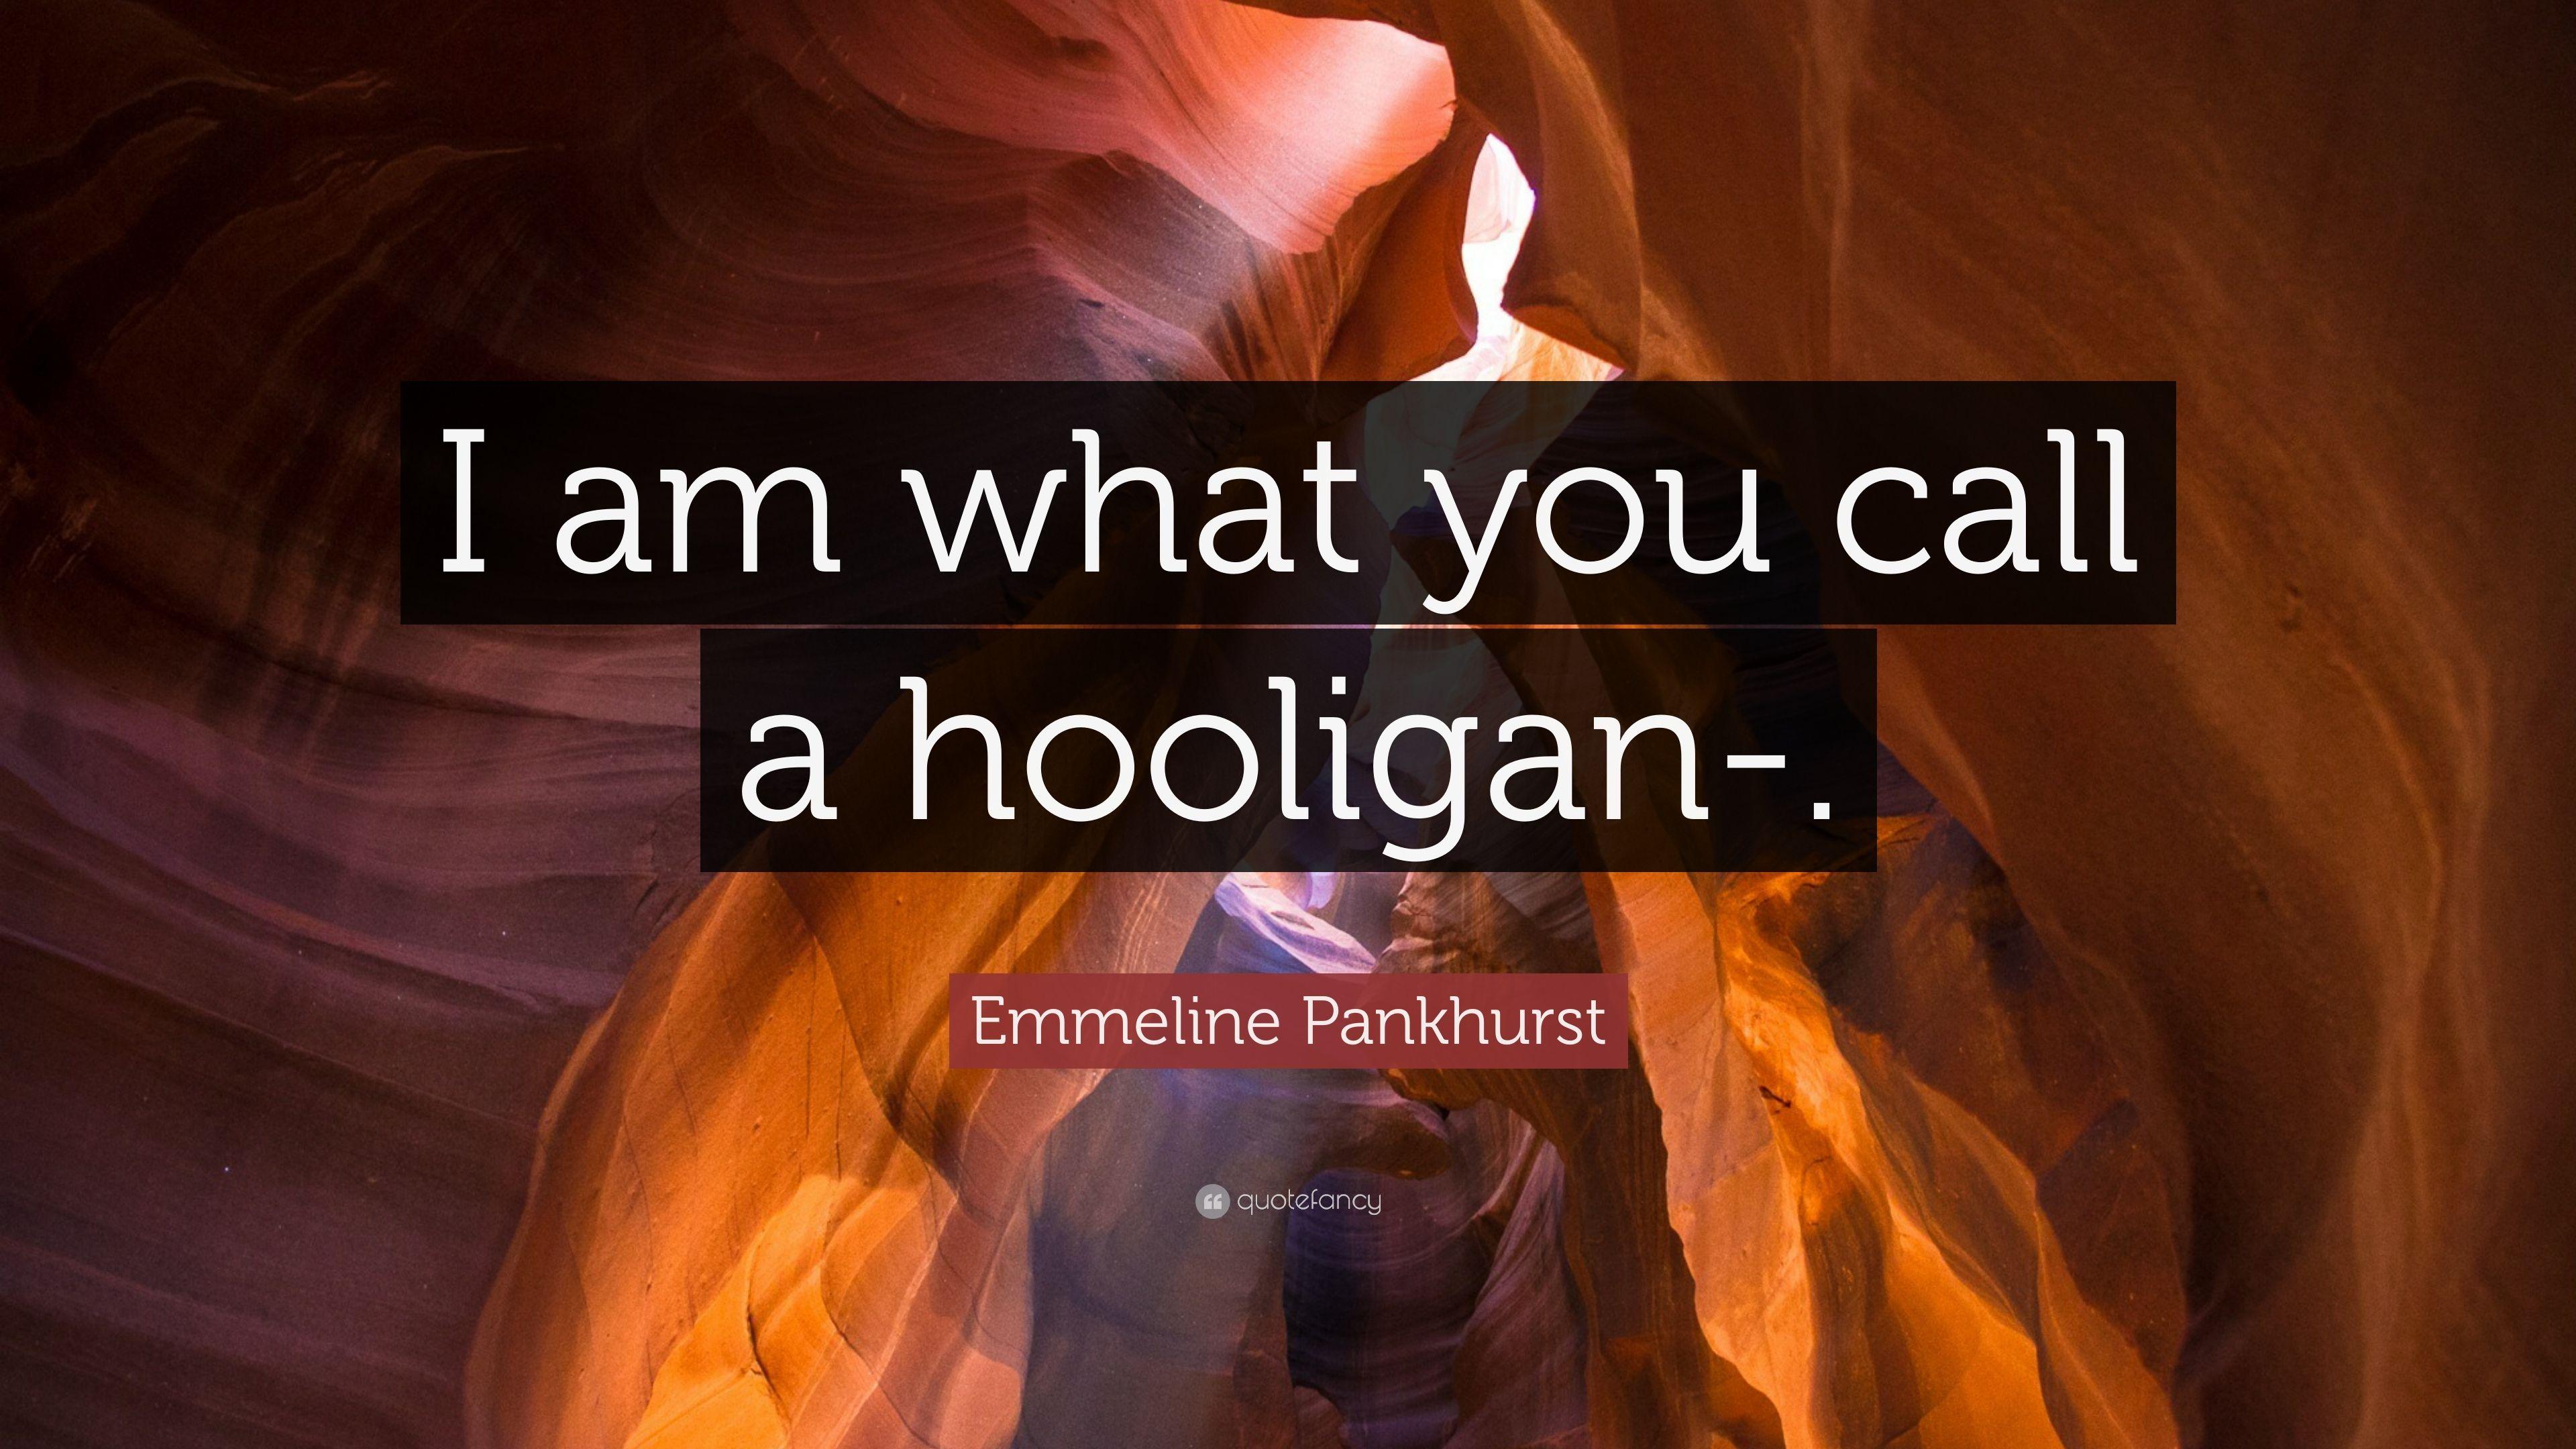 Emmeline Pankhurst Quote: “I am what you call a hooligan-” 10